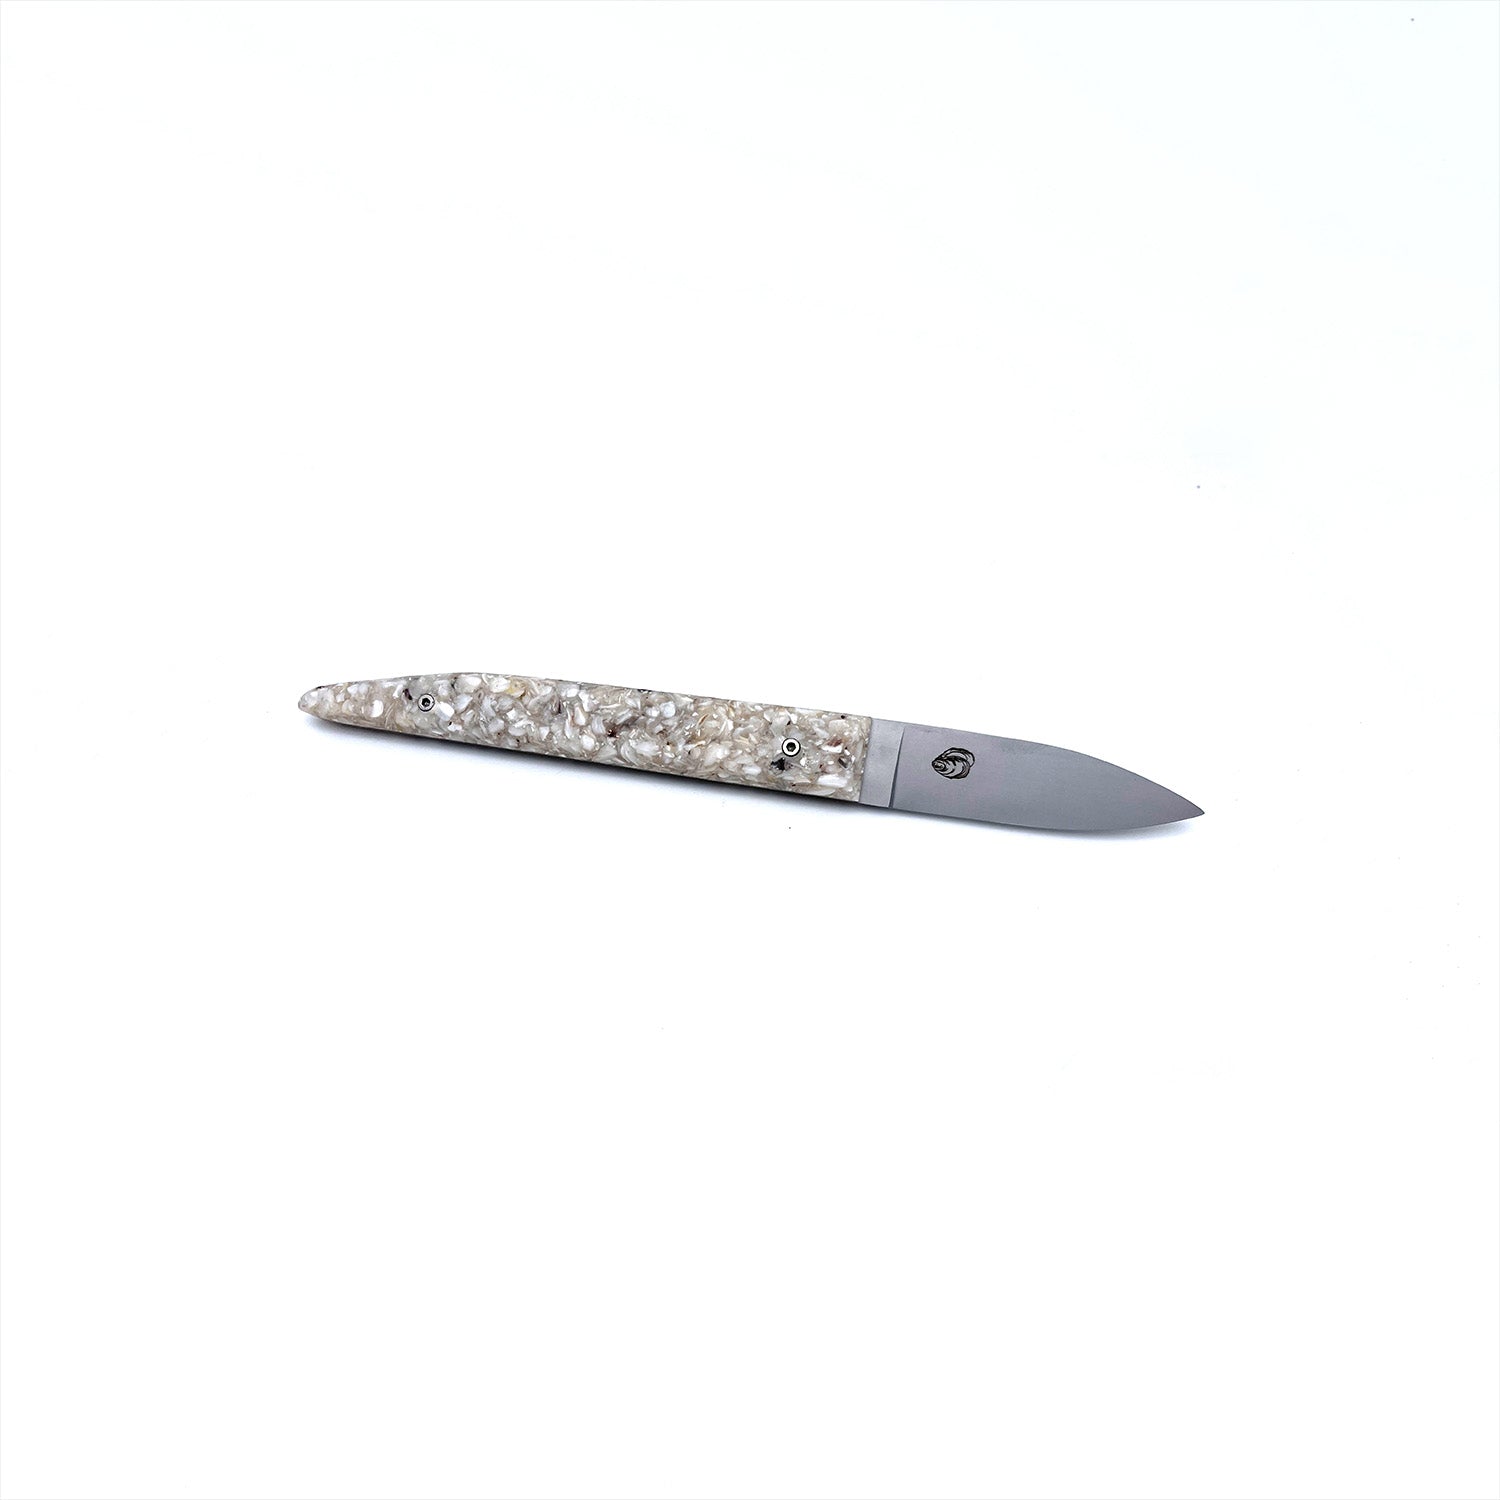 Oyster knife with a handle made from recycled oyster shells